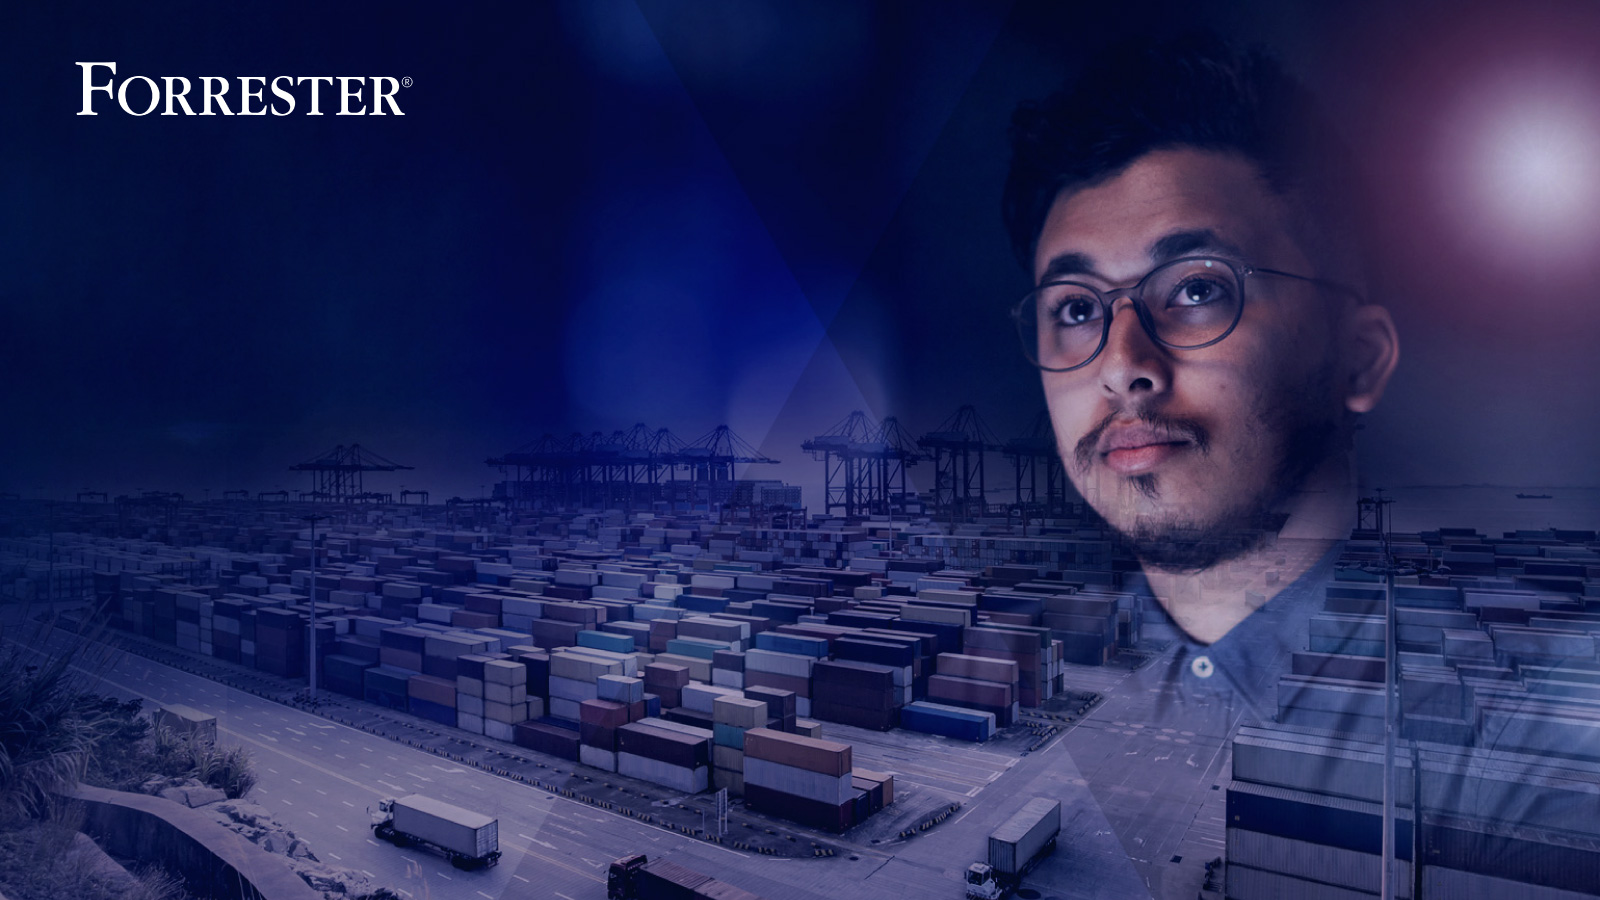 Man wearing glasses overseeing a large shipping yard filled with freight containers